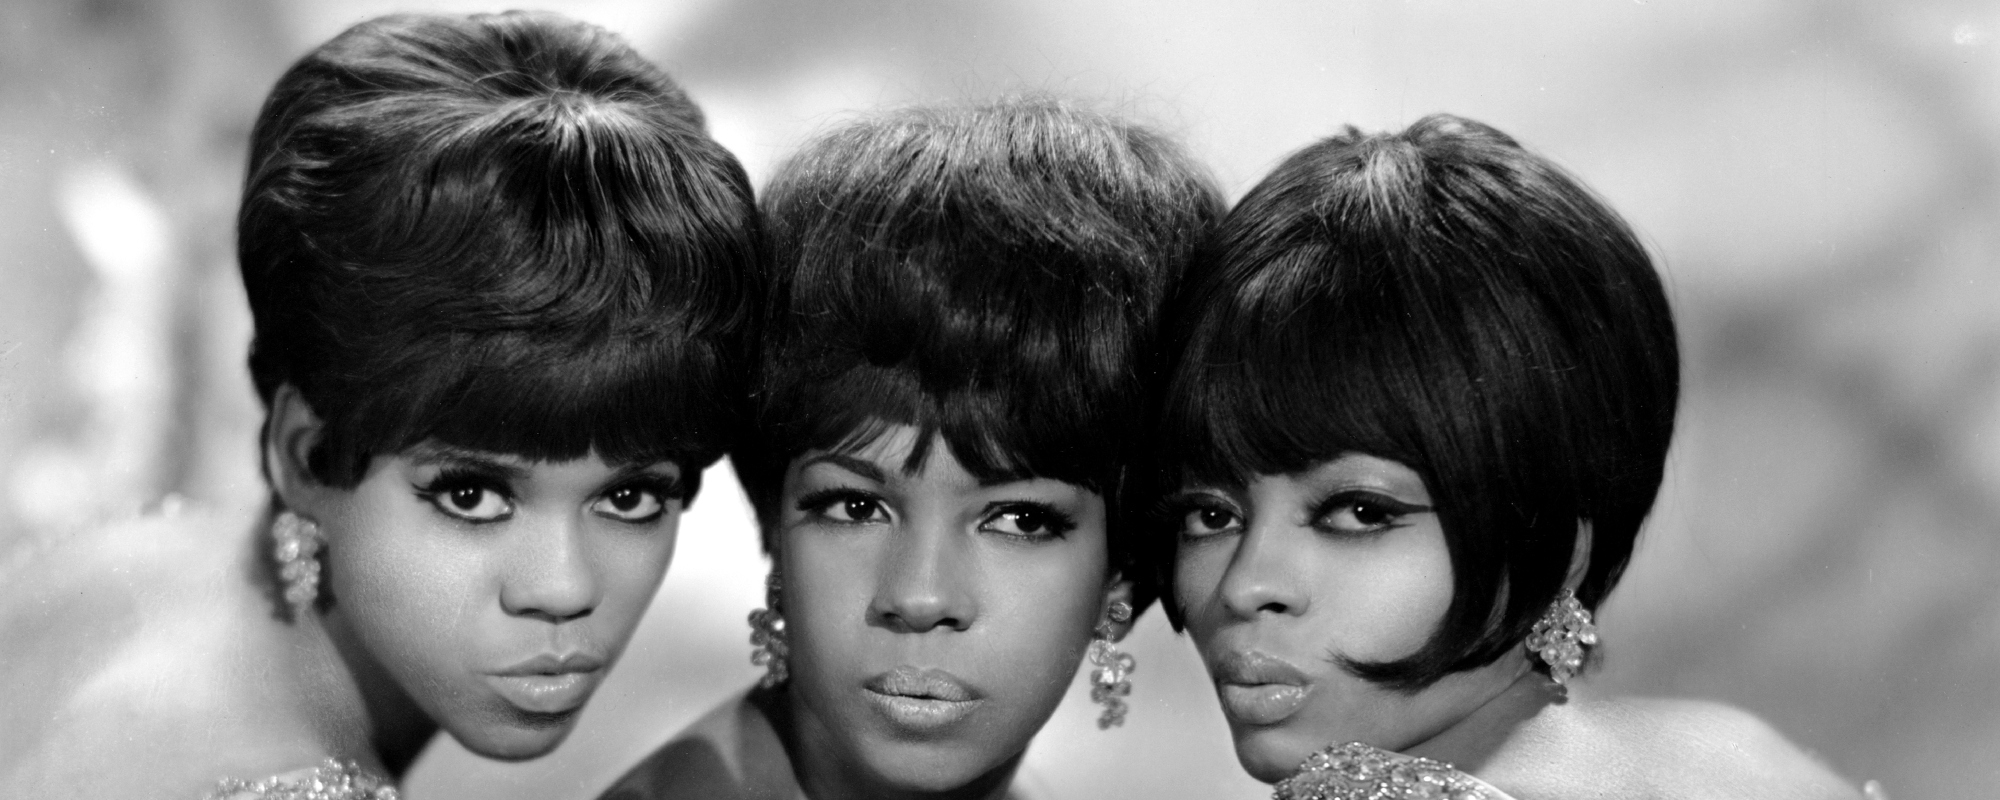 The Meaning Behind “You Can’t Hurry Love” by The Supremes and How It Started a Run of Chart-Toppers for the Group